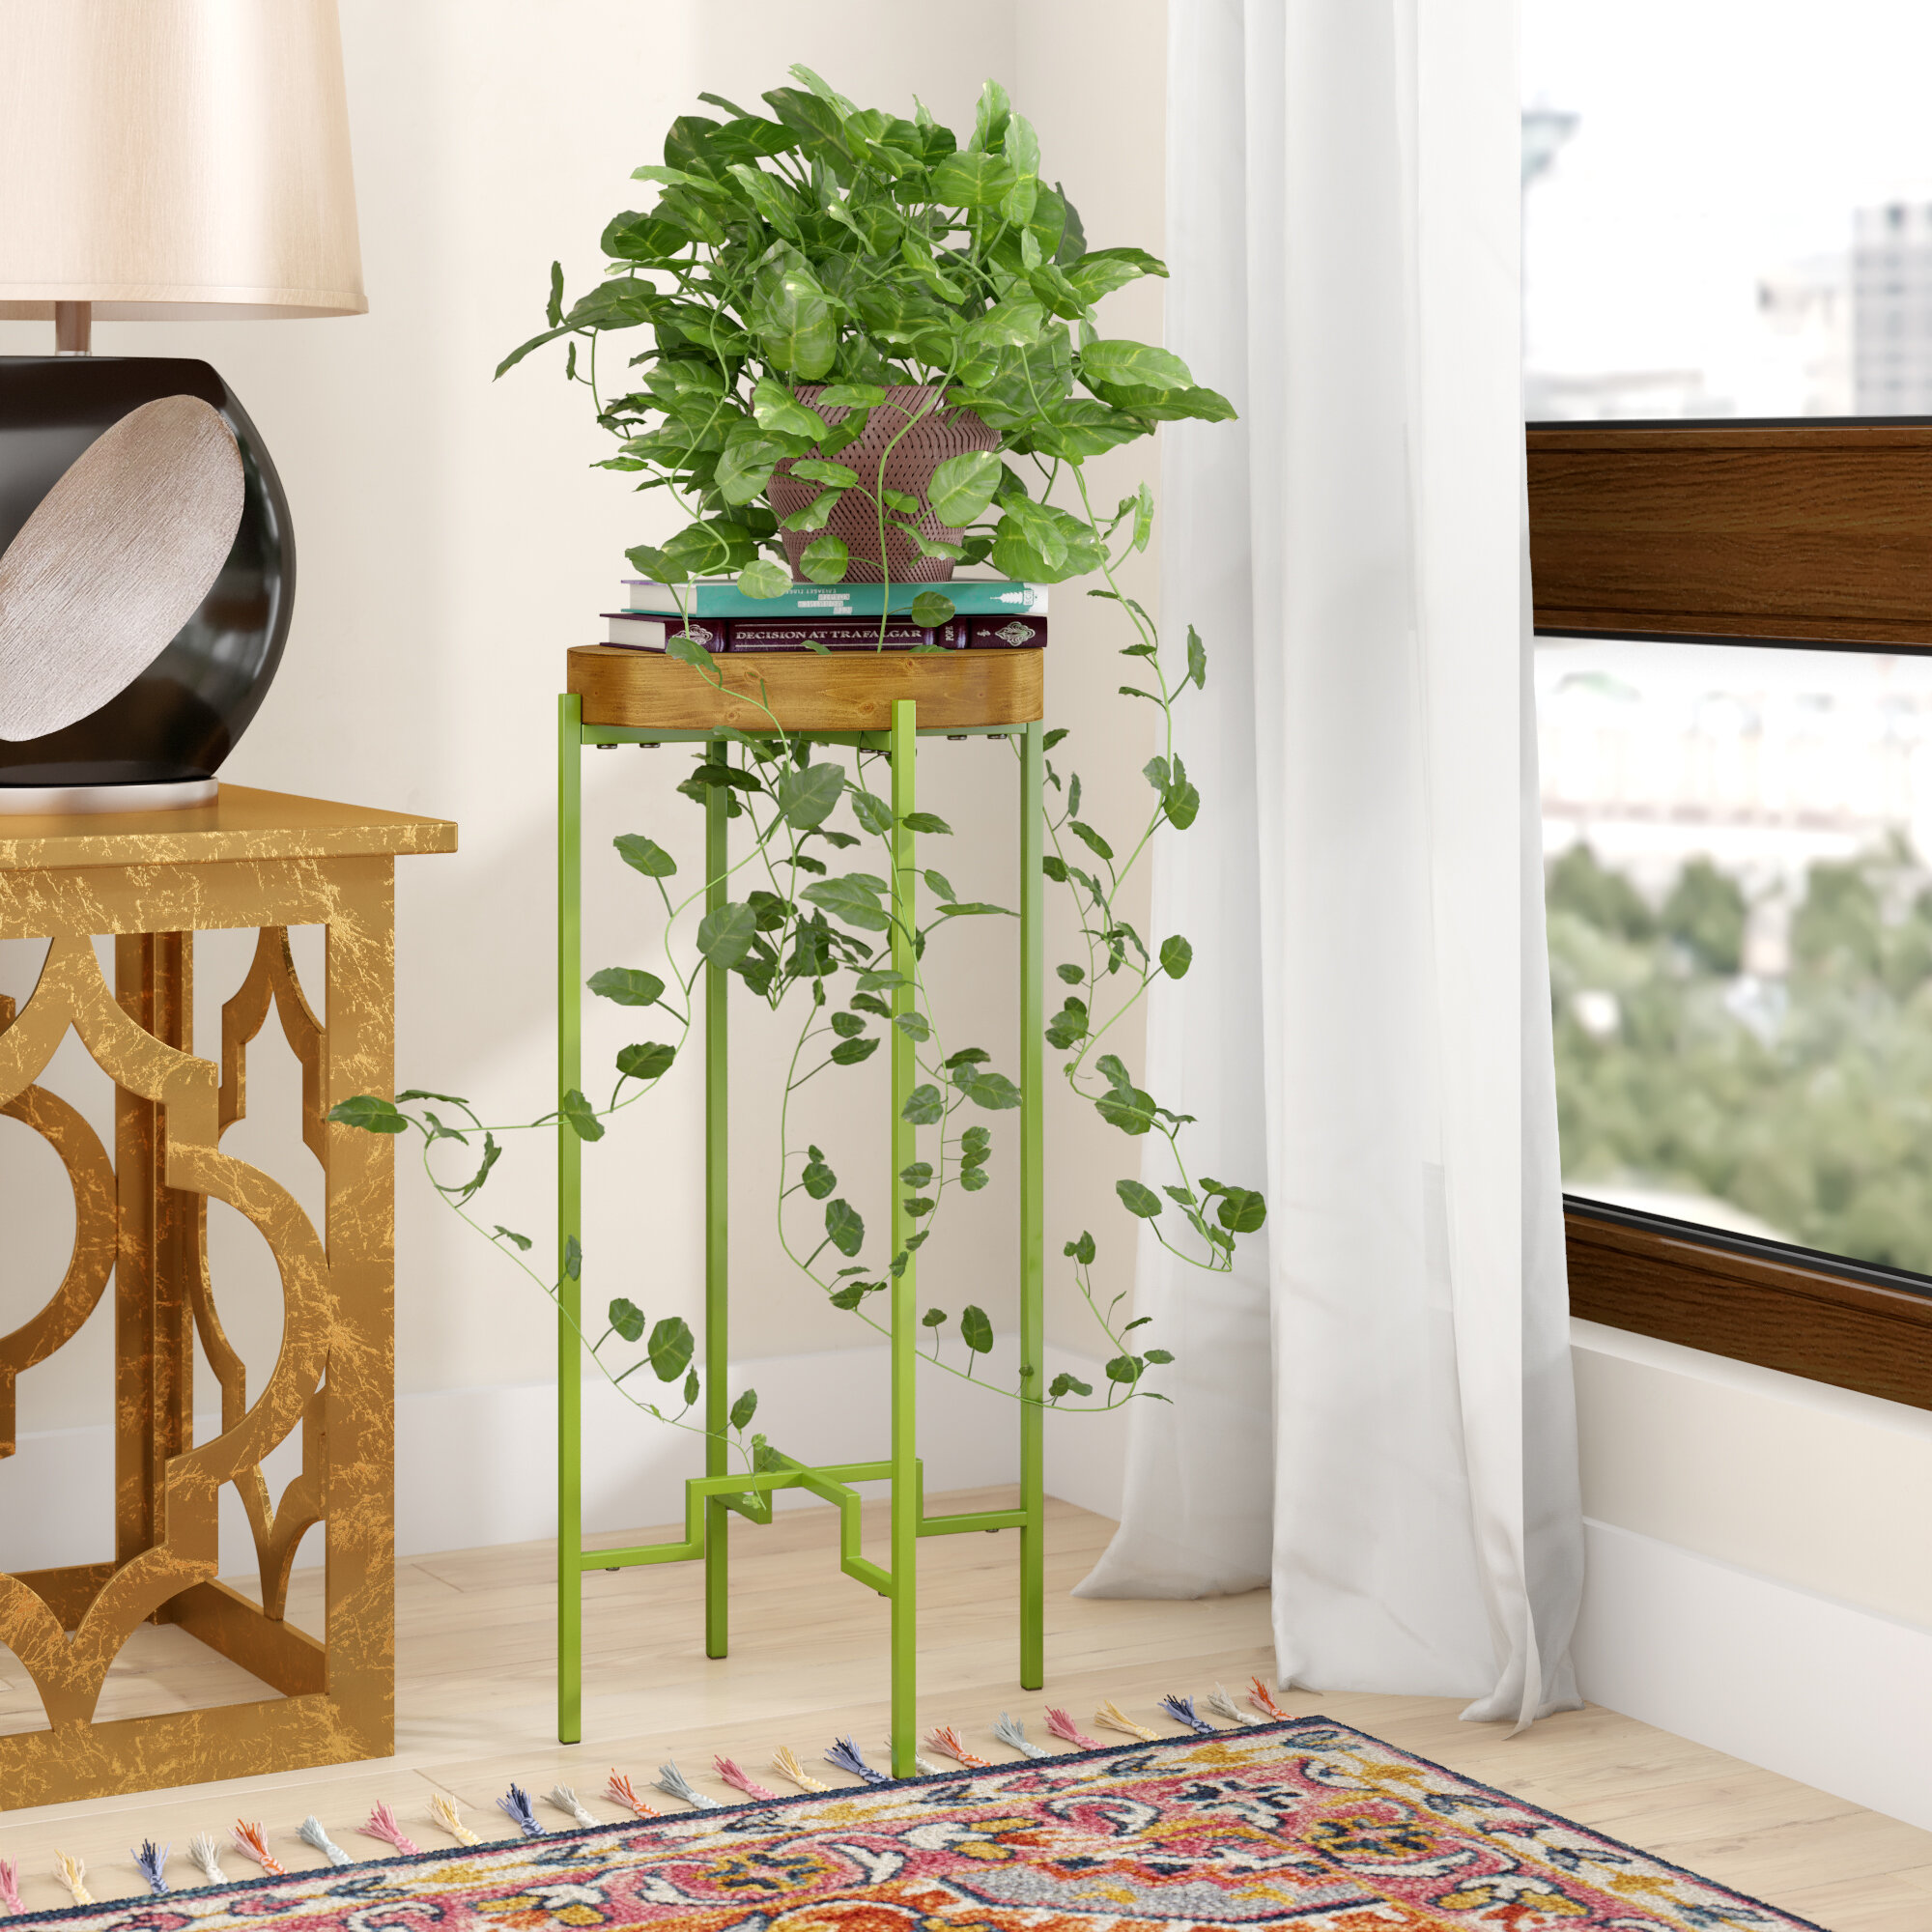 Etagere Plant Stands Tables You Ll Love In 2020 Wayfair